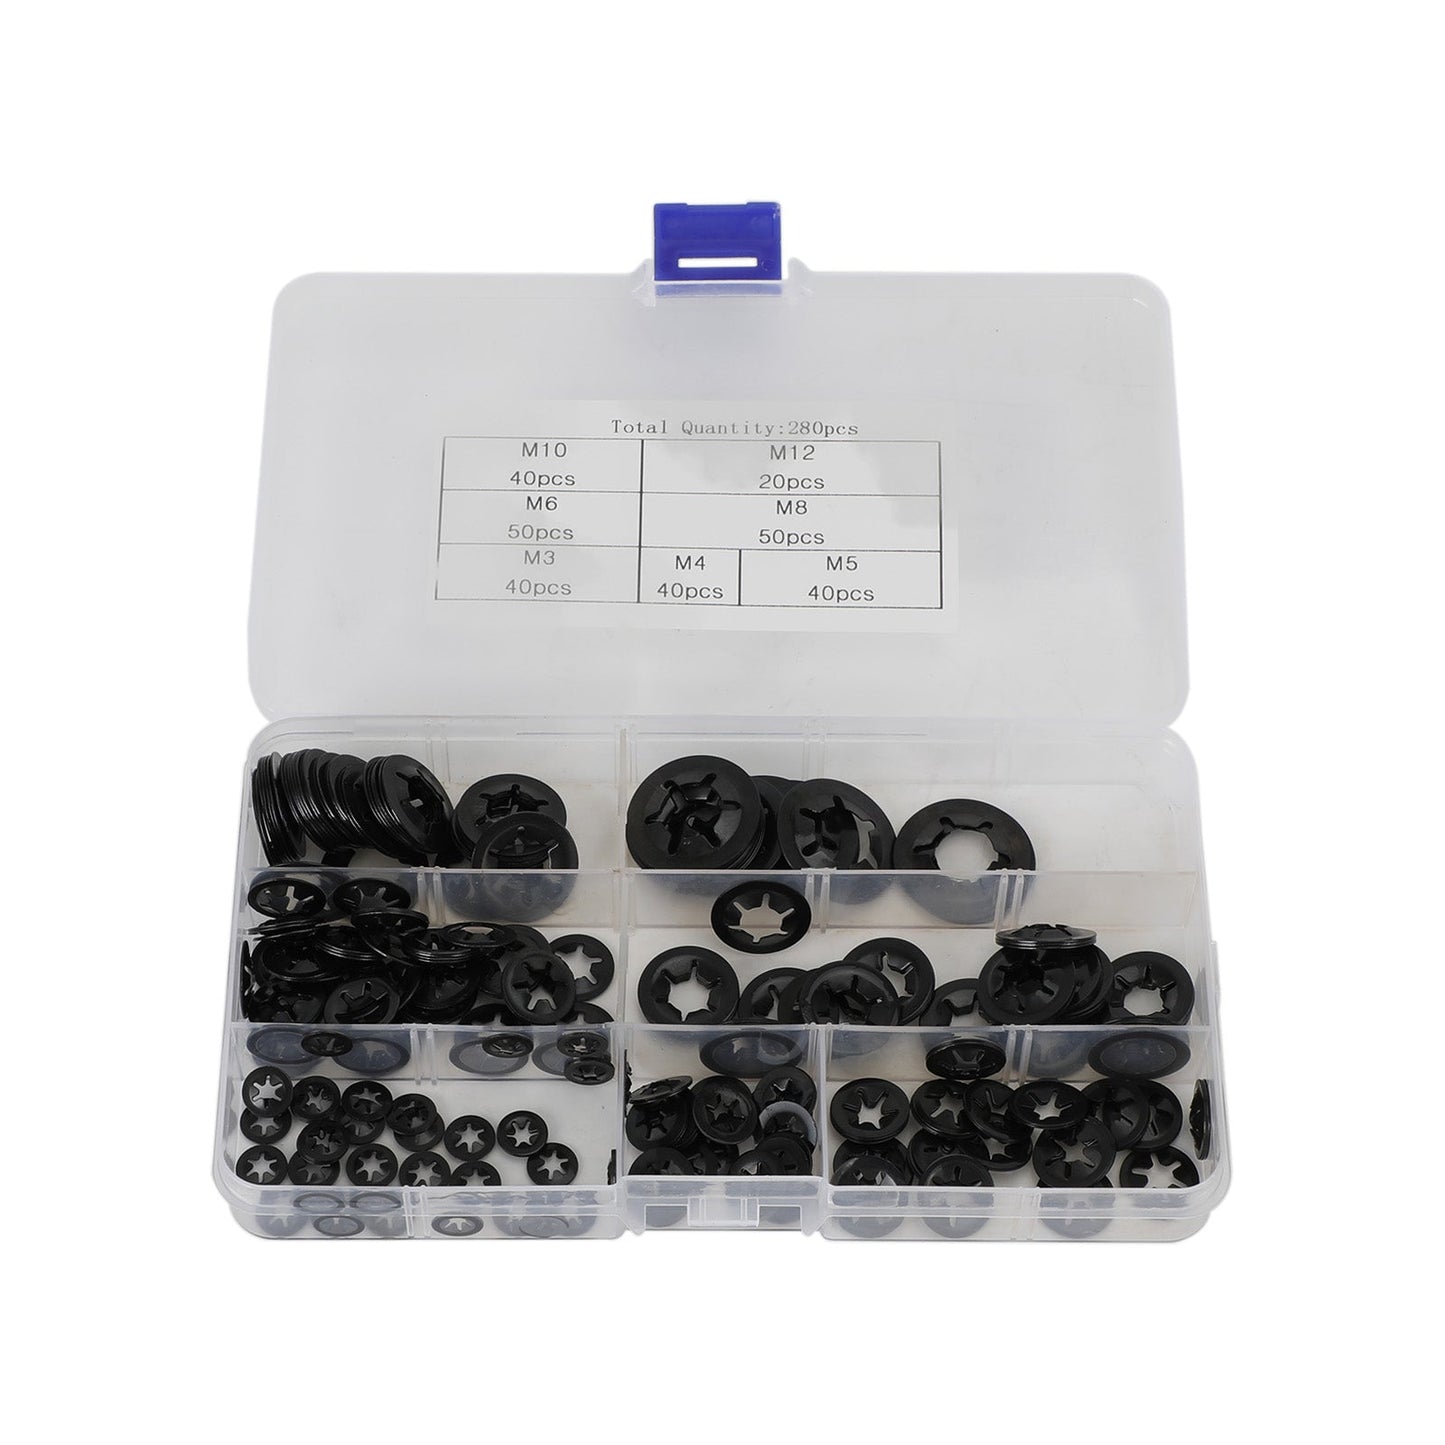 280Pcs Internal Tooth Star Lock Spring Quick Washer Push On Speed Nut Assortment